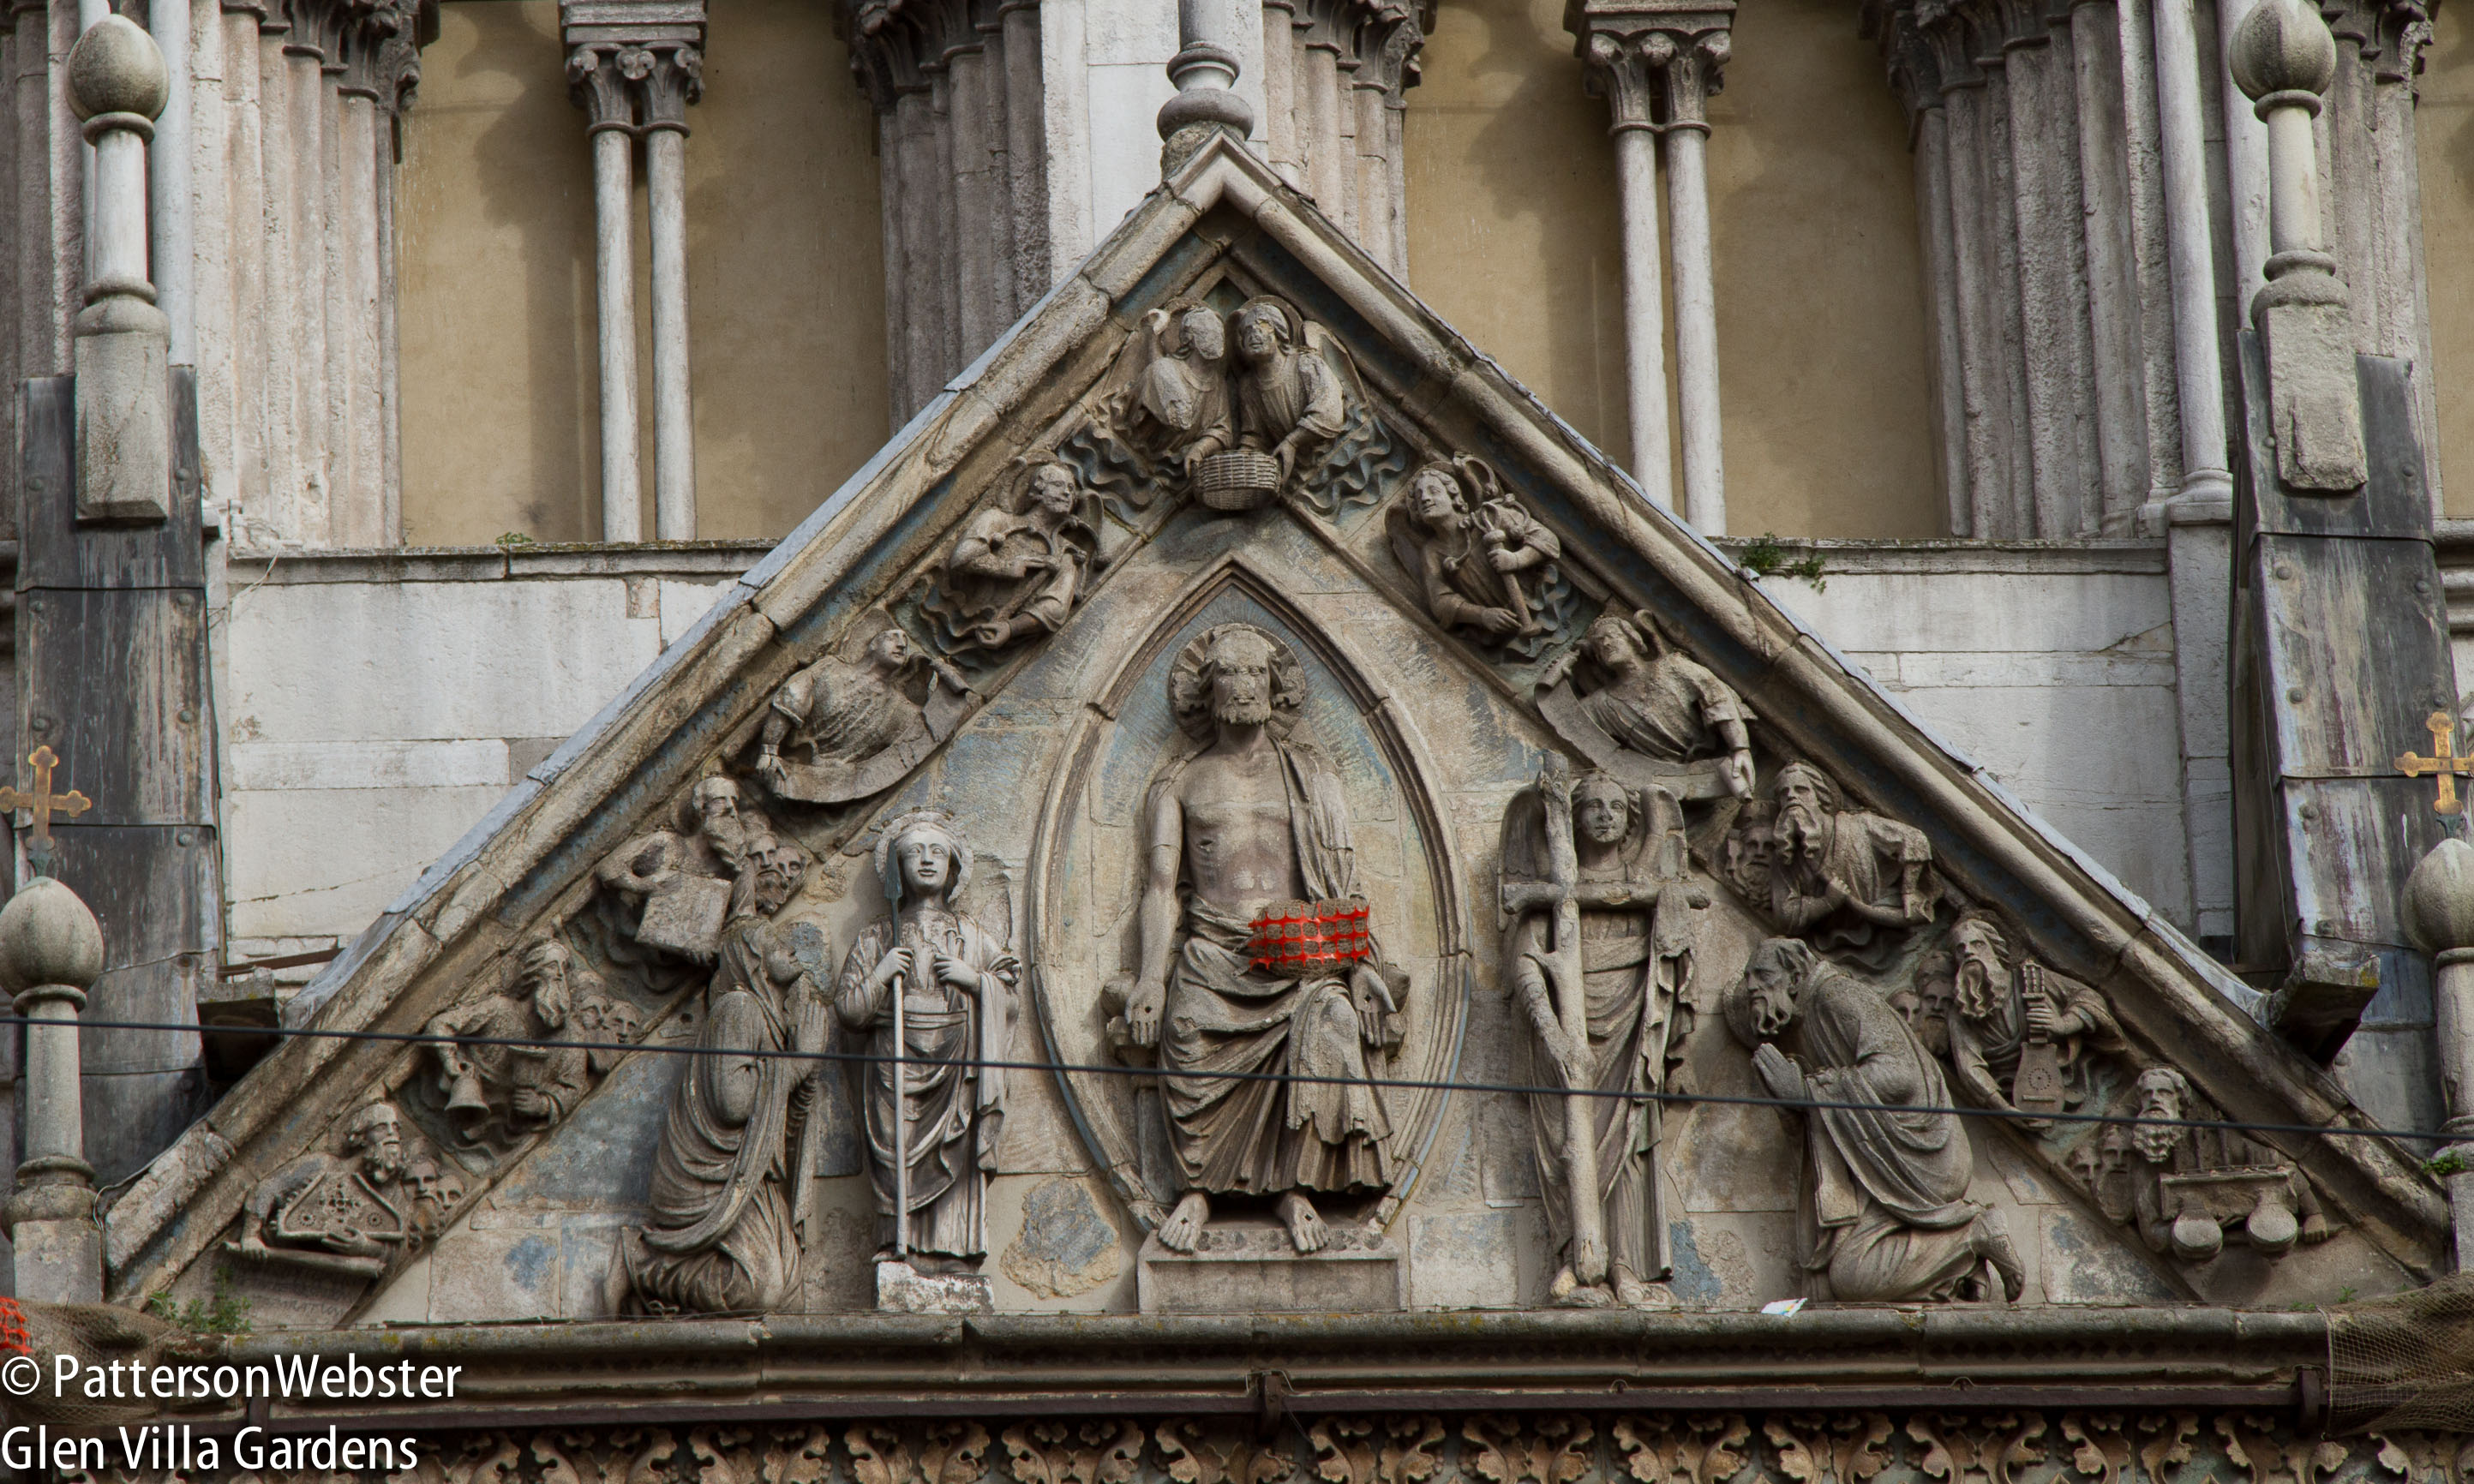 Christ is surrounded by angels. The orange mesh is protecting a vulnerable piece of stone.